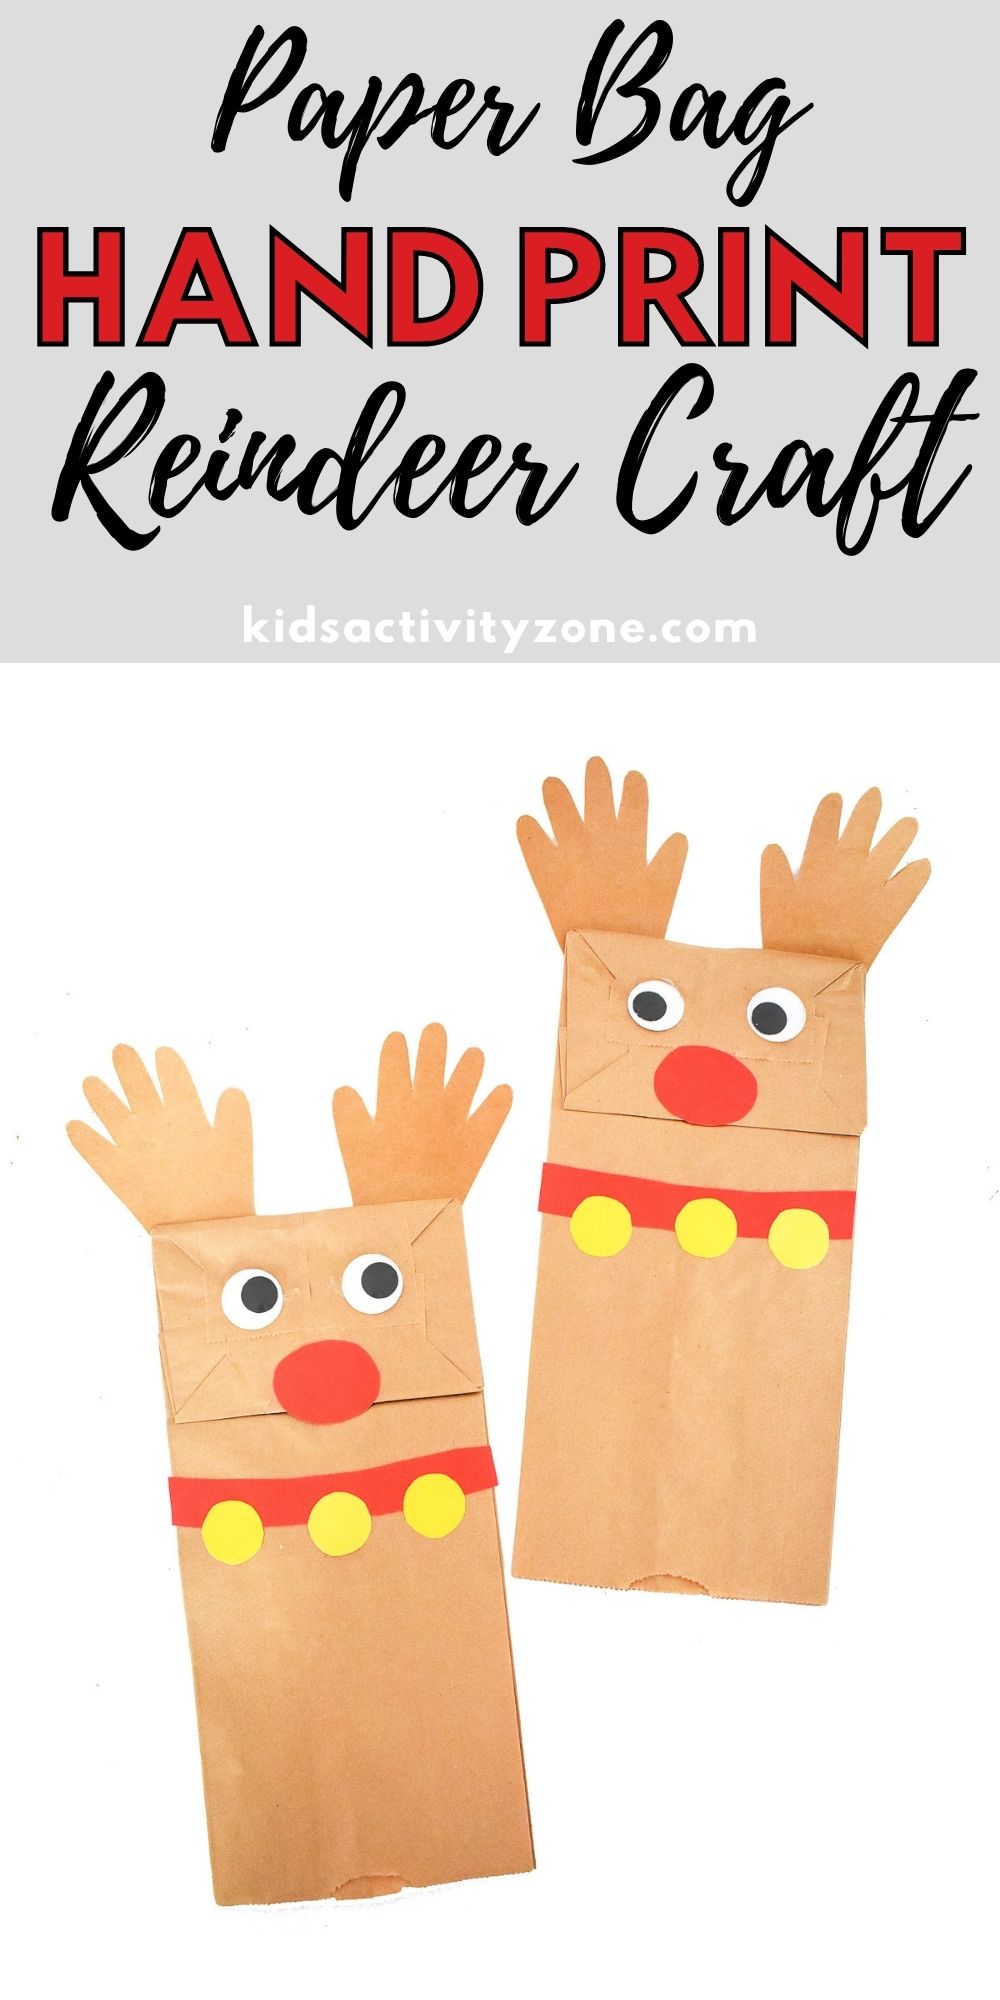 Need a quick and easy Christmas craft? Love Rudolph the Red Nose Reindeer? Make these Paper Bag Handprint Reindeer Craft. Minimal supplies needed for an easy craft idea!